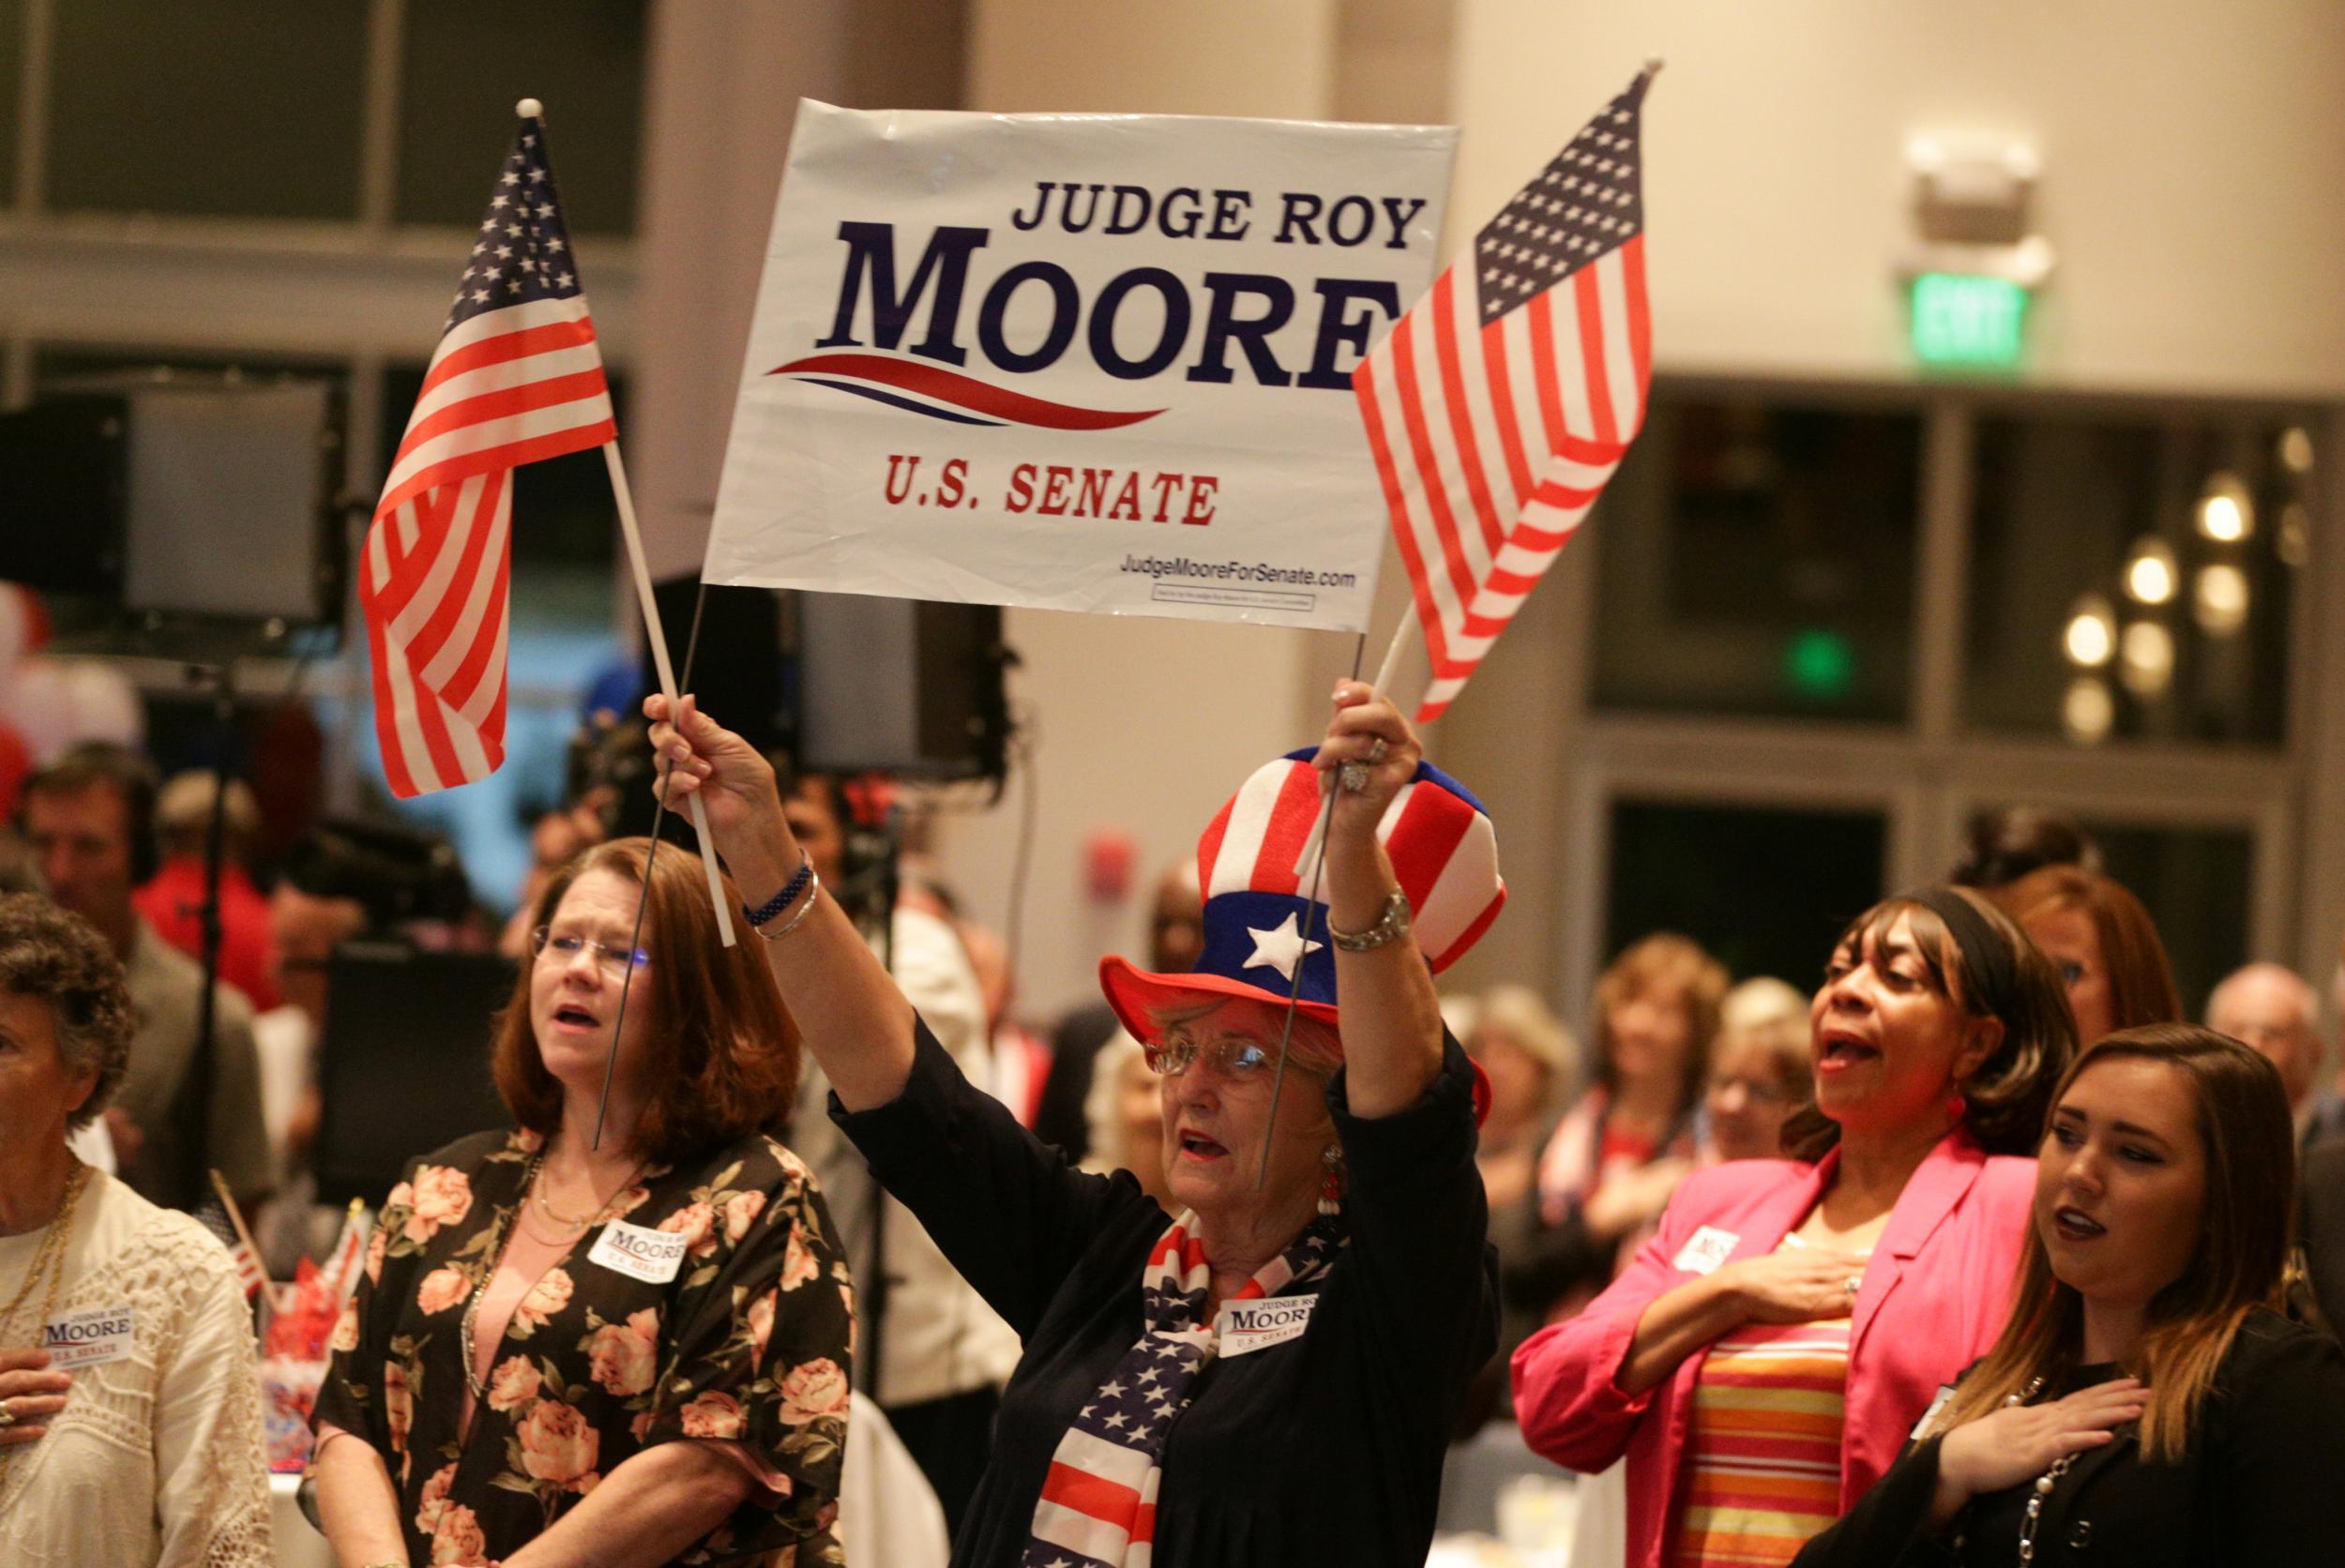 Moore's supporters include hardcore Christian conservatives